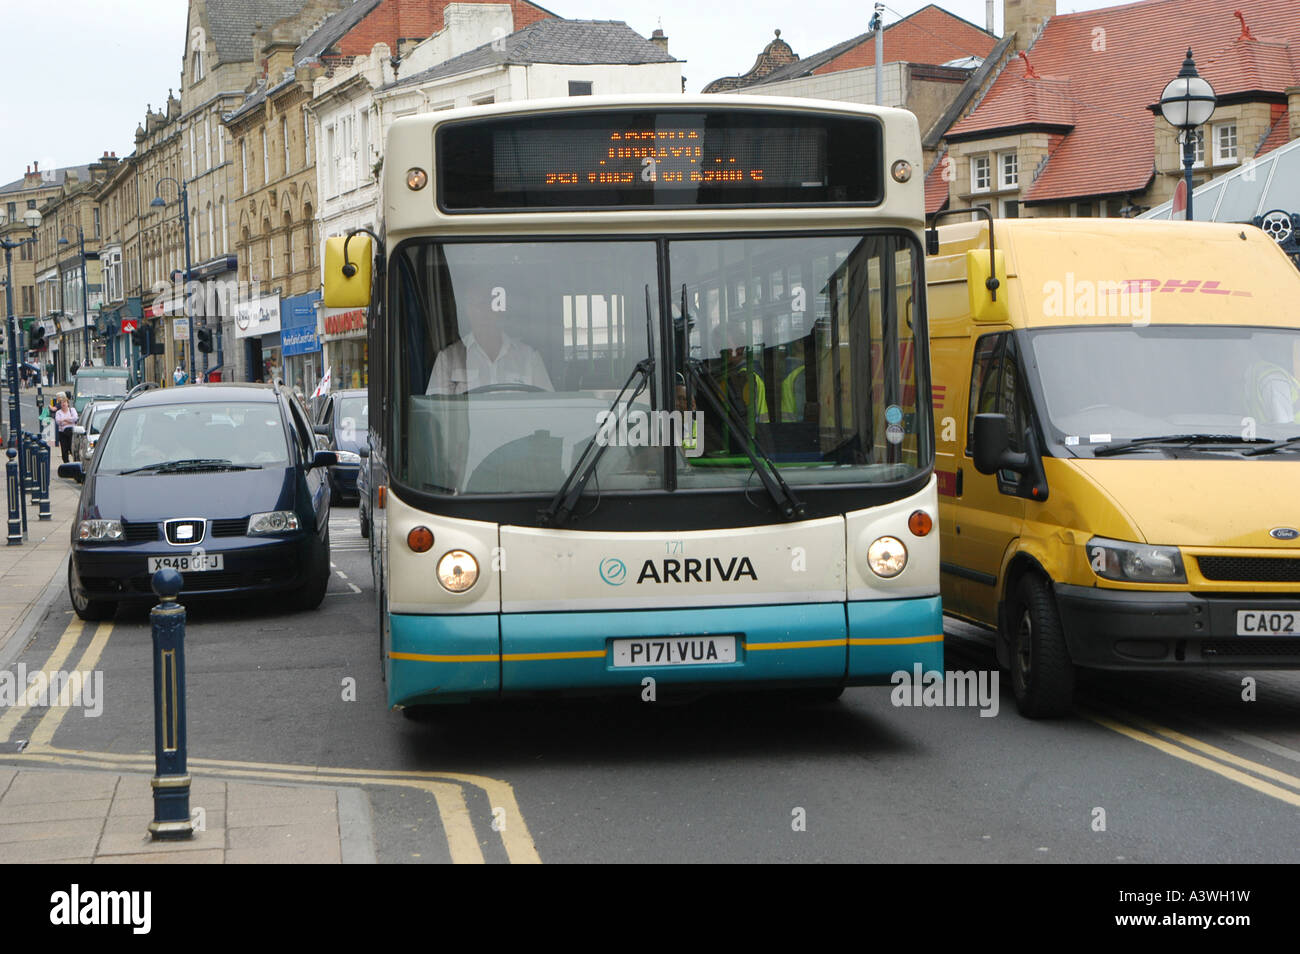 An arriva bus struggles to pass a delivery van that is causing an obstruction on a street in the uk Stock Photo